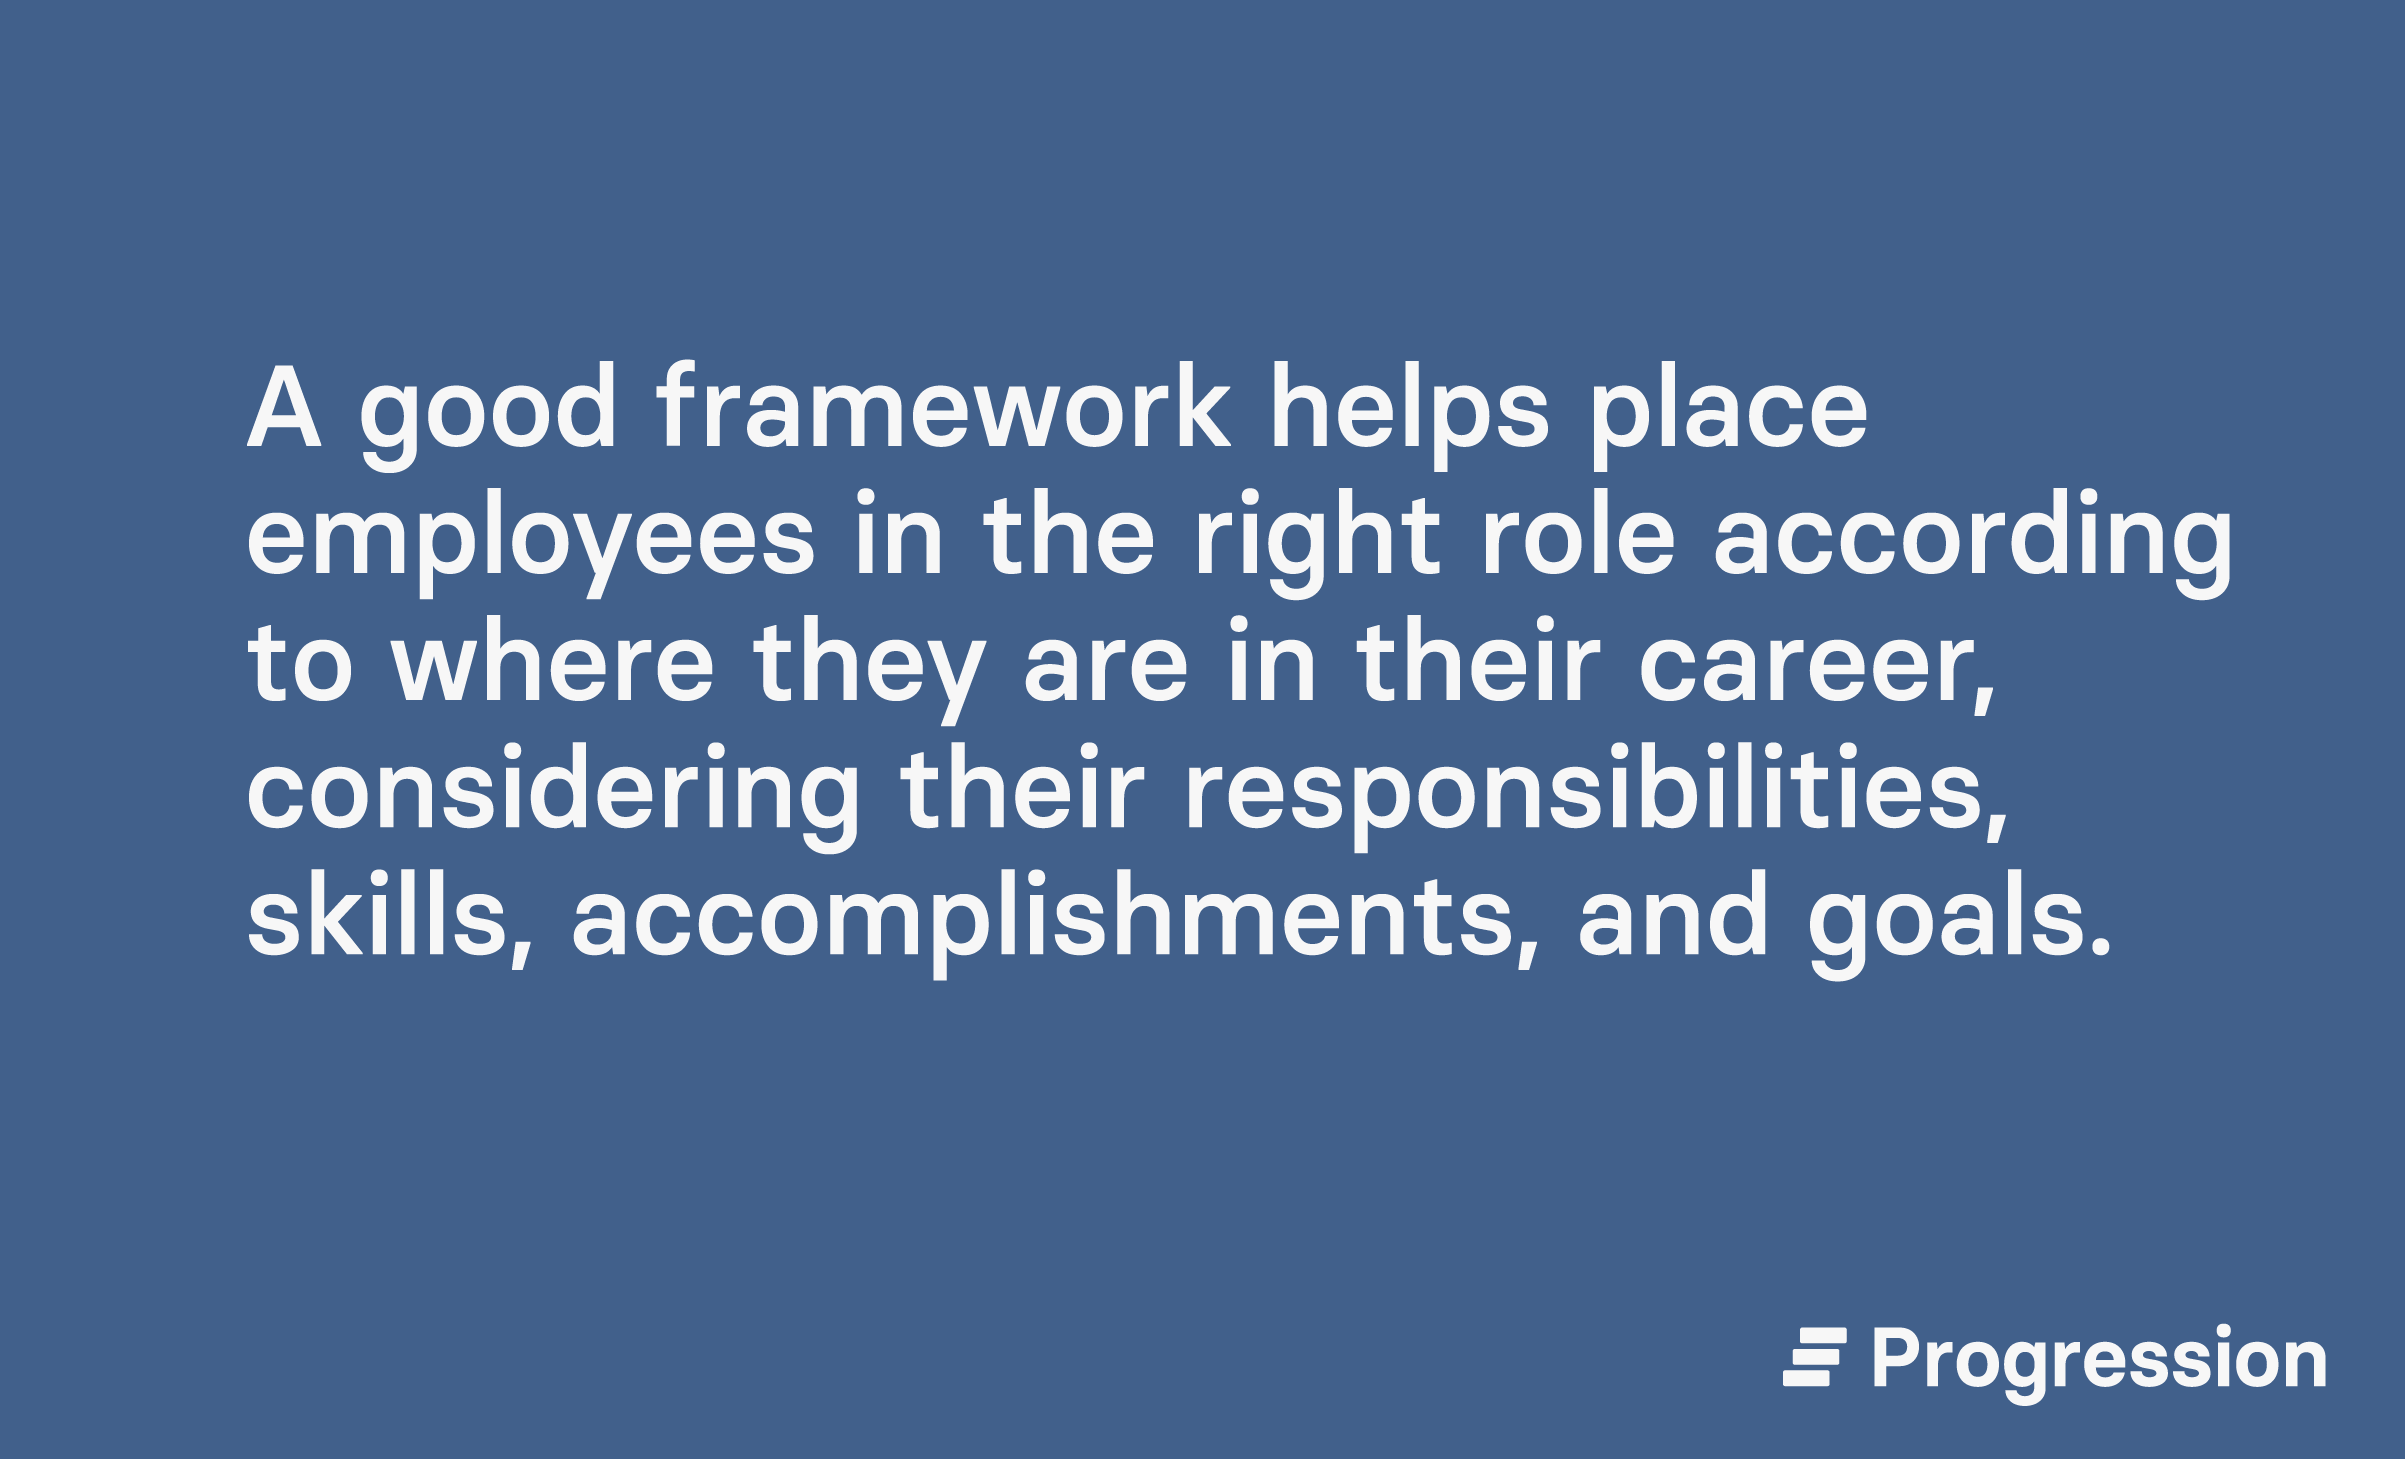 Graphic highlighting how a good framework helps place employees in the right roles